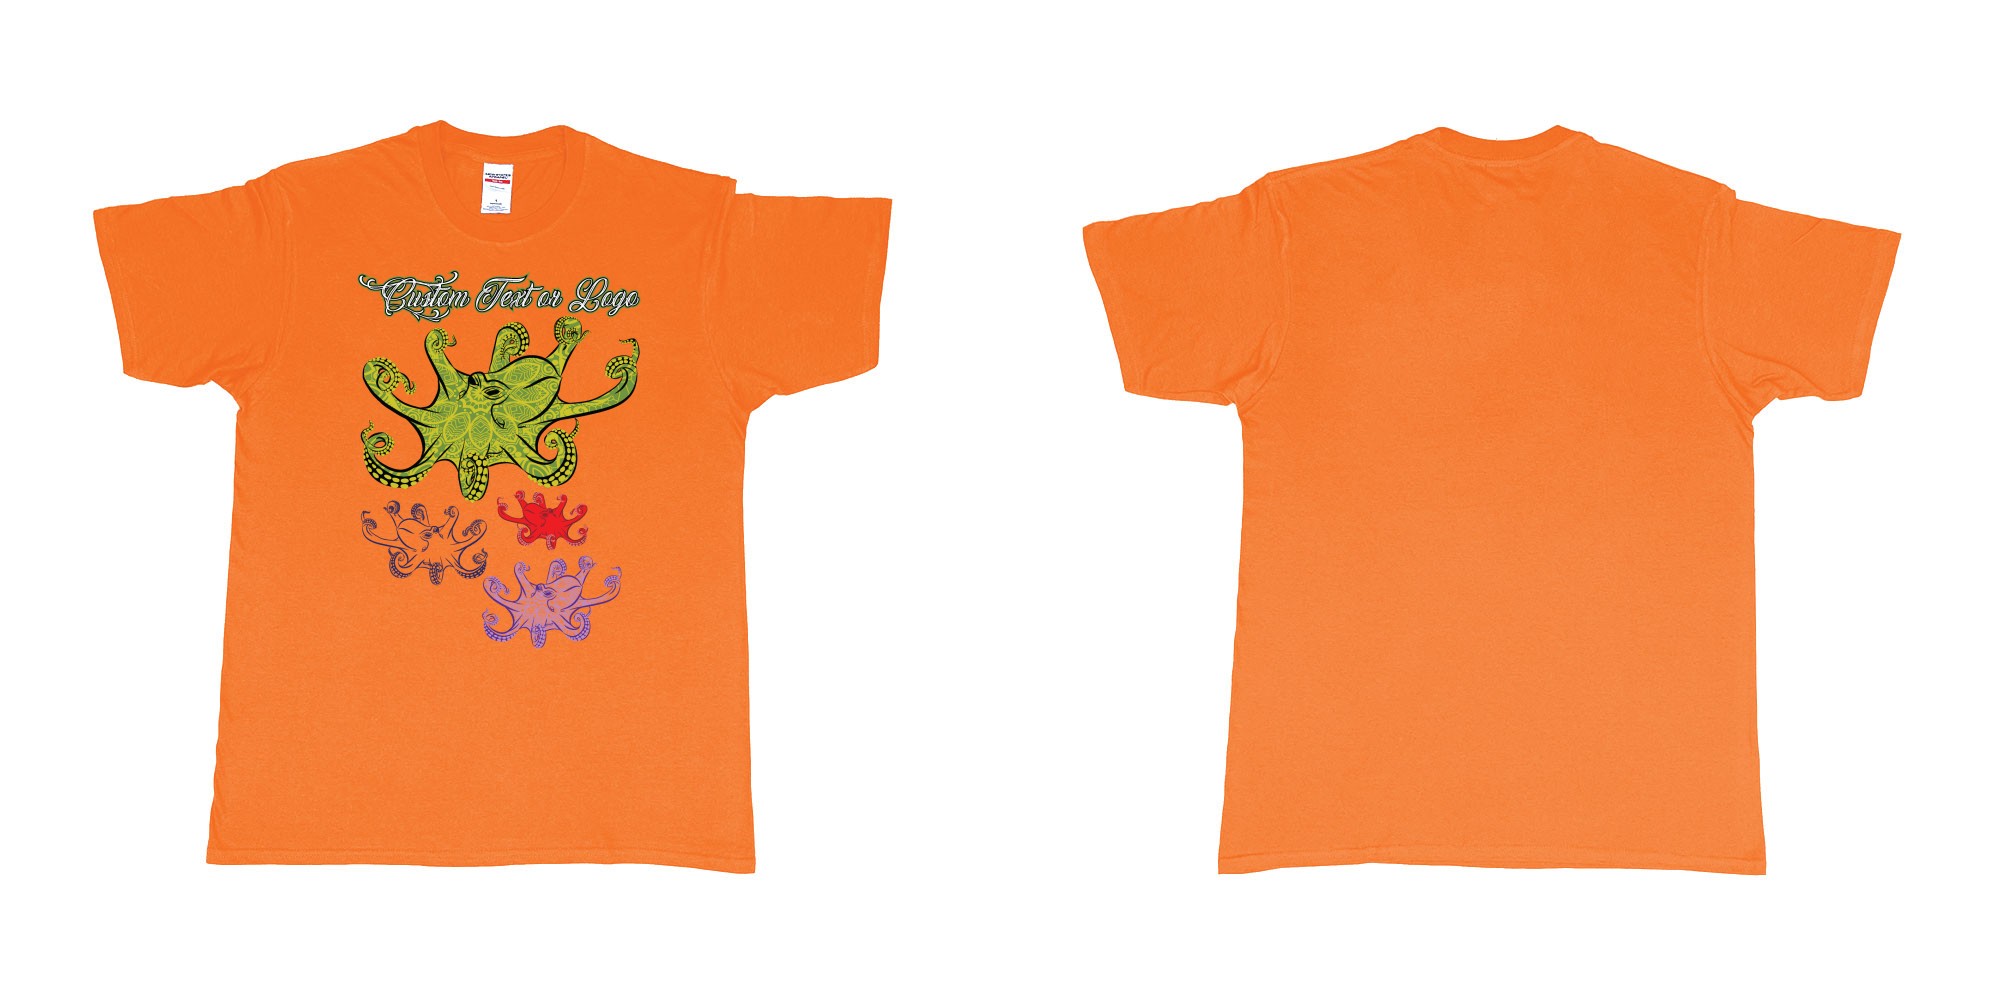 Custom tshirt design octopus curly in fabric color orange choice your own text made in Bali by The Pirate Way